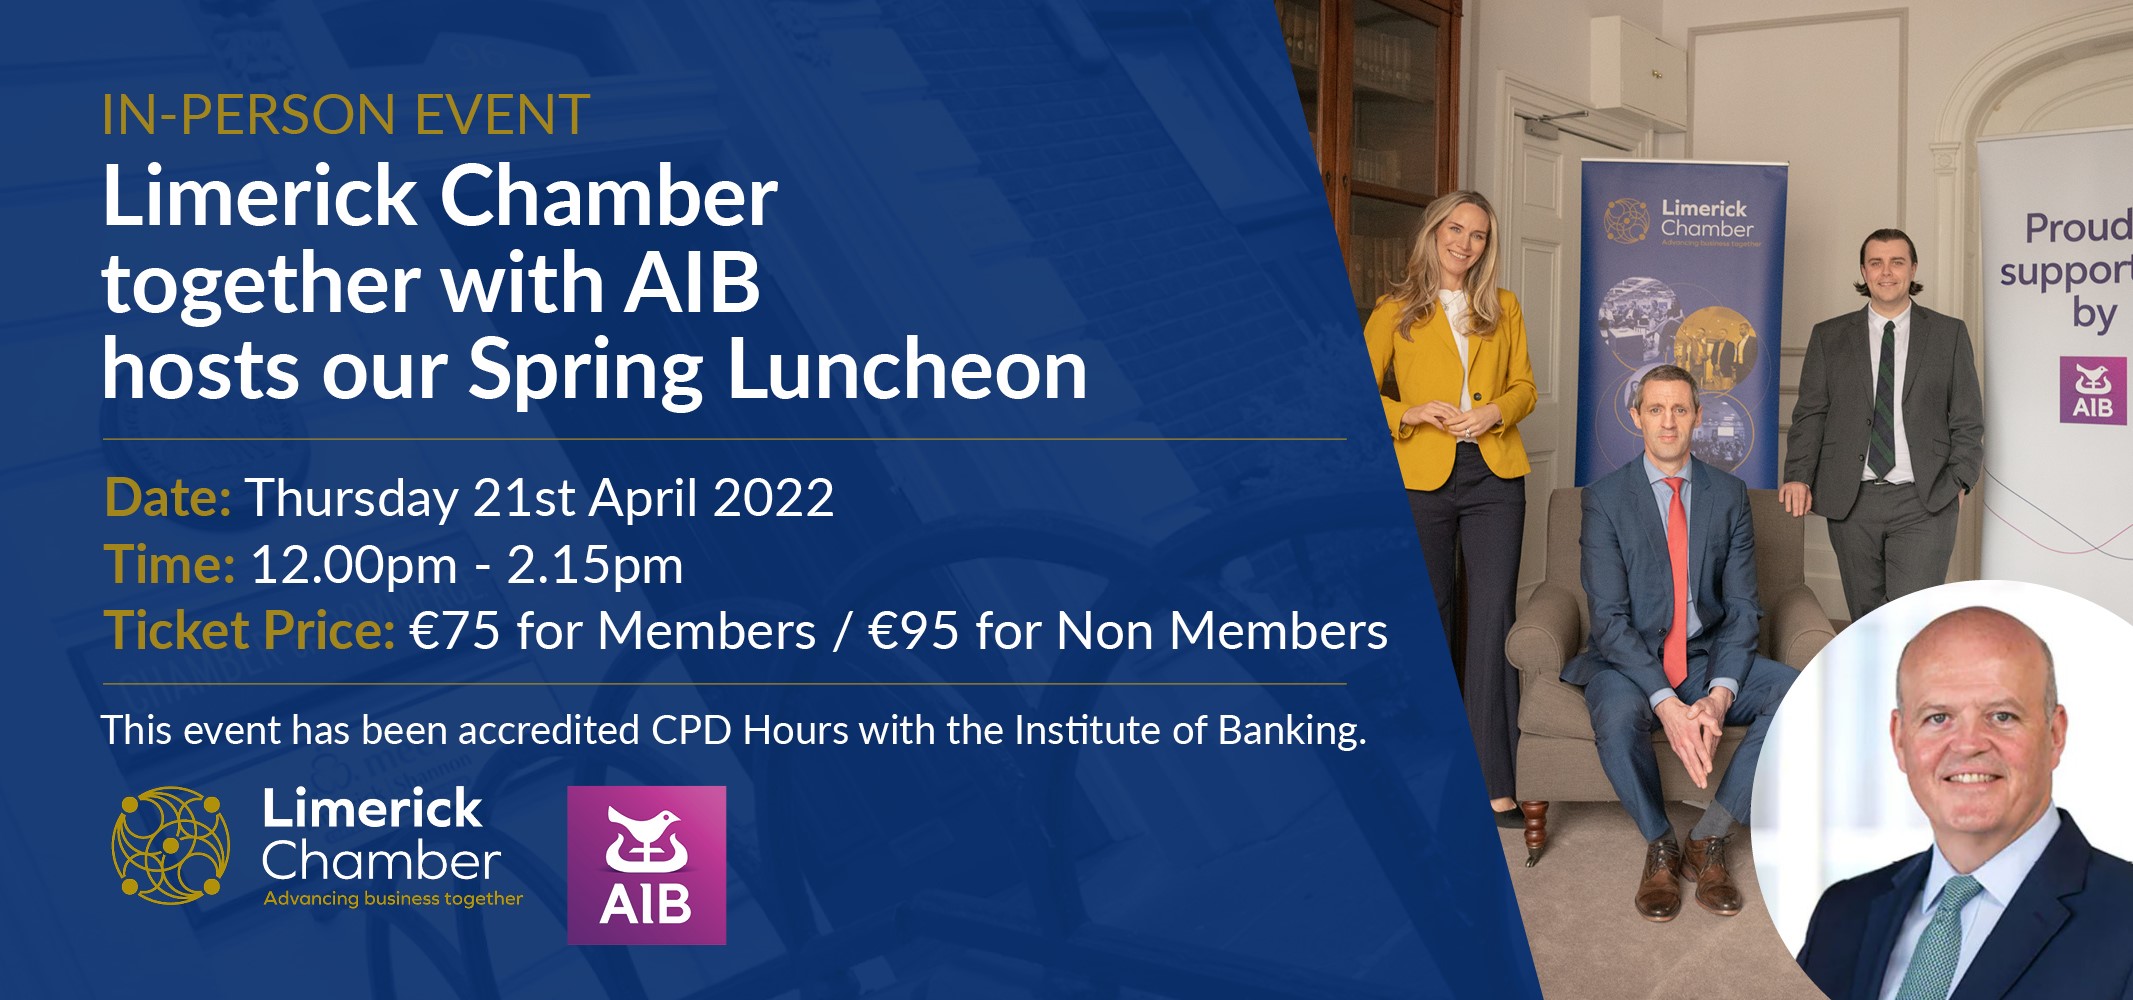 Limerick Chamber Spring Luncheon will take place on Thursday, April 21 from 12pm-2:15pm at the Savoy Hotel